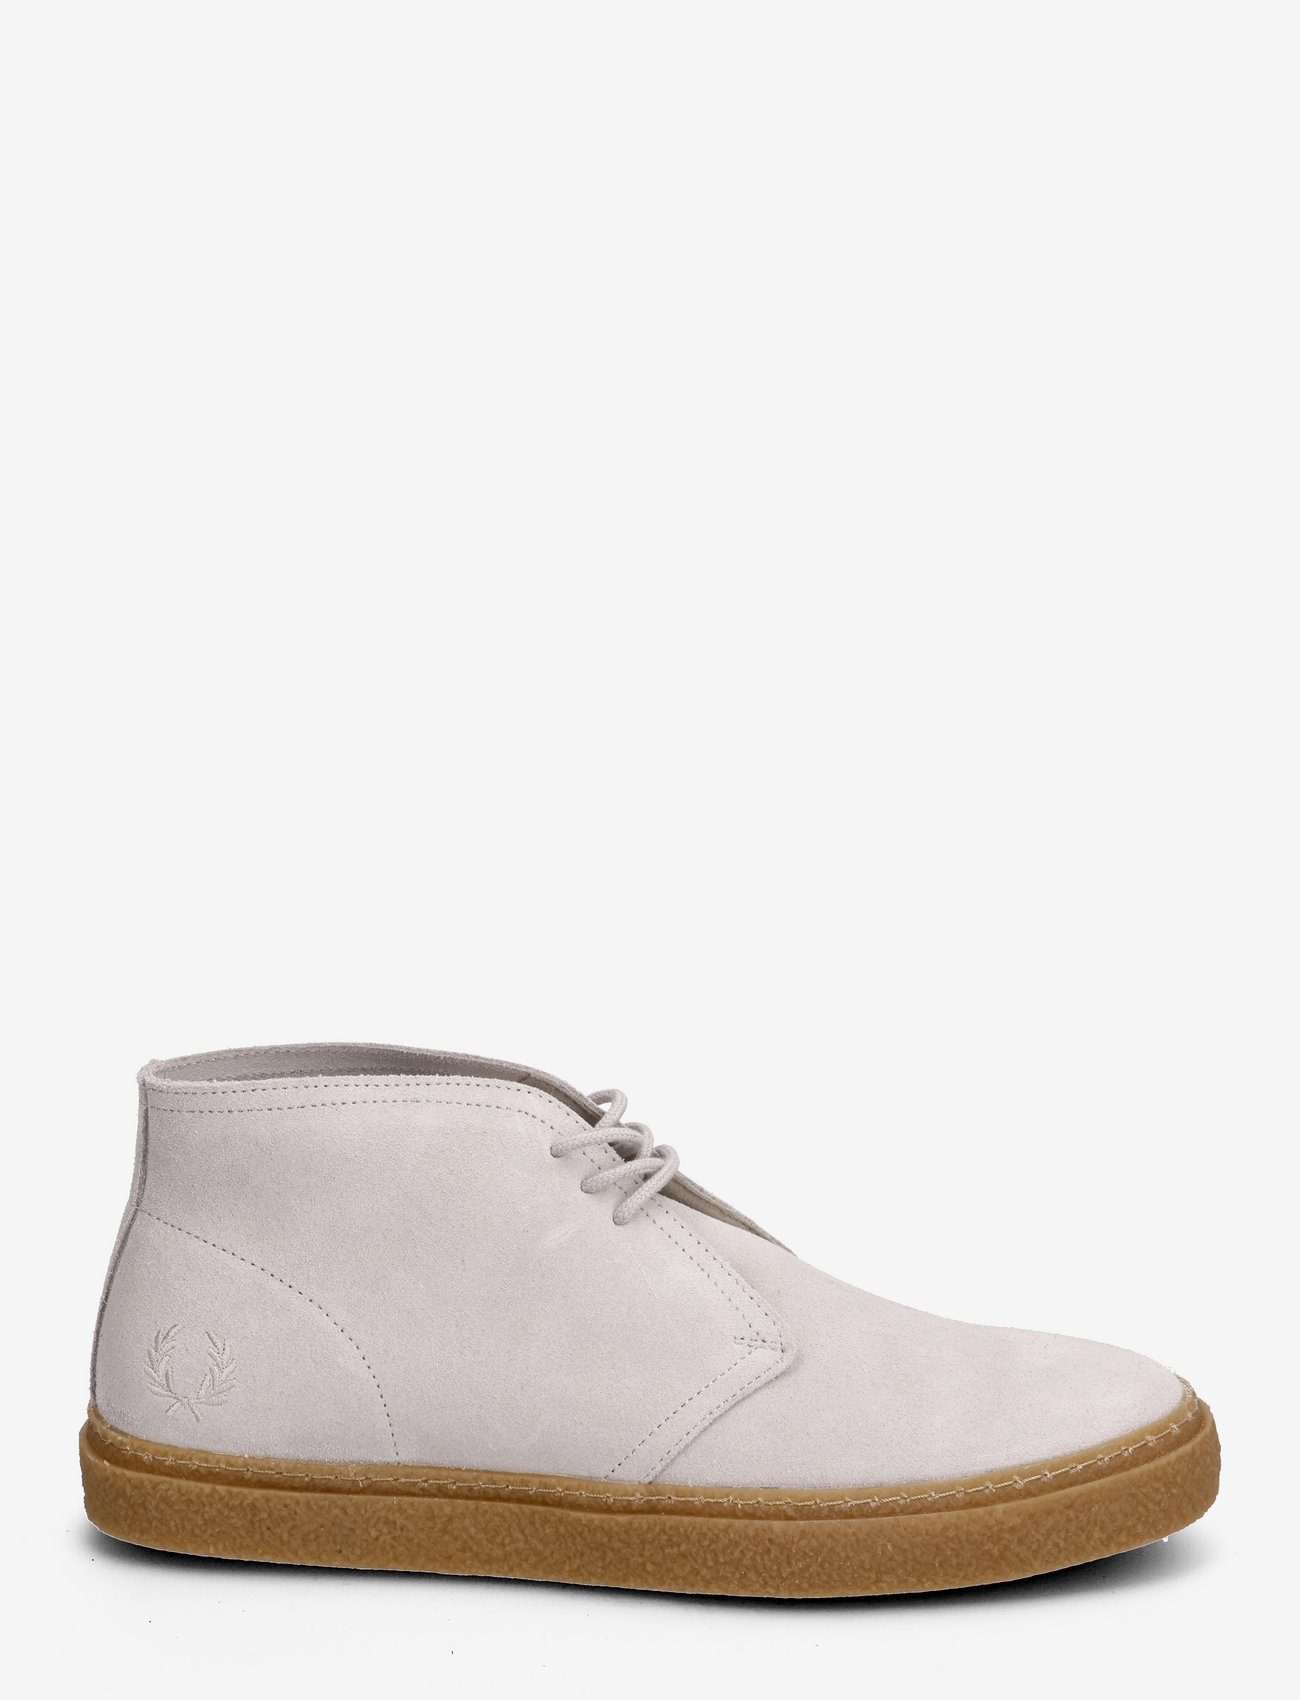 Fred Perry - HAWLEY SUEDE - „chukka“ tipo batai - light oyster - 1